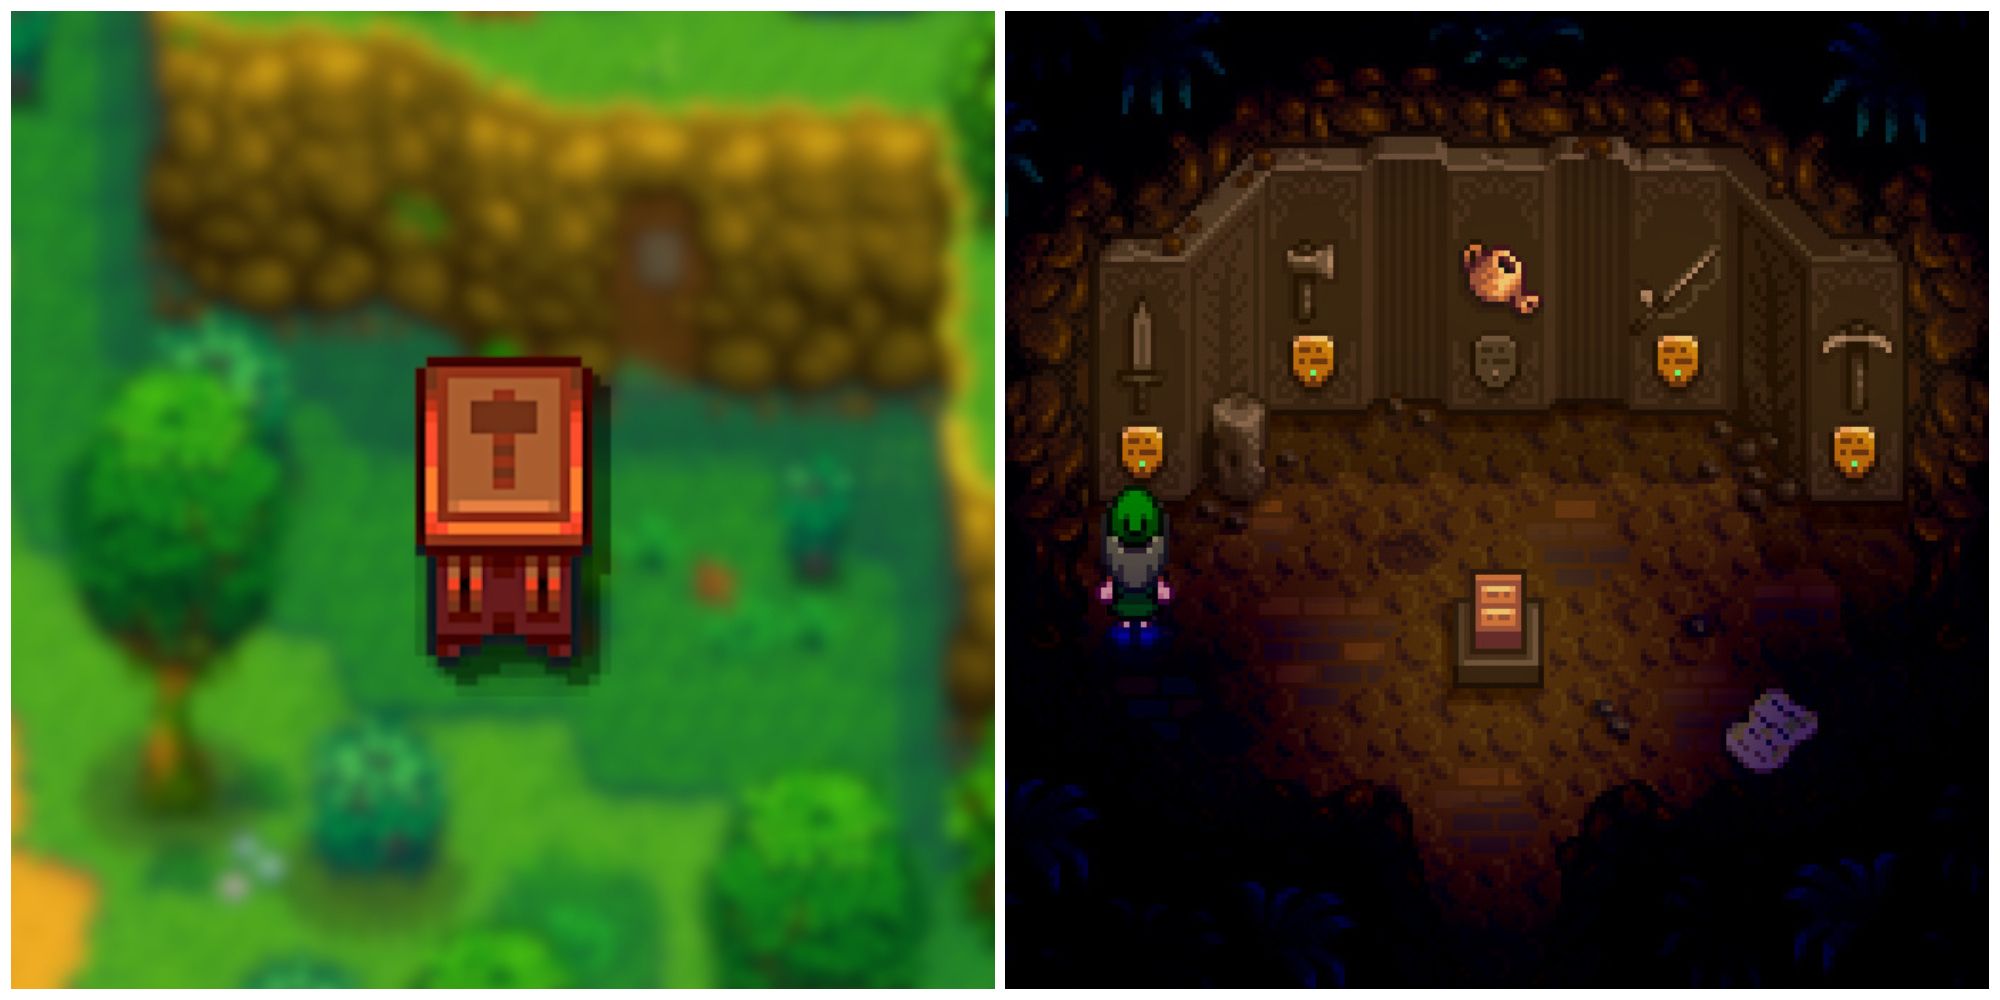 Split image of the Mini-Forge and a character visiting the Mastery Cave in Stardew Valley